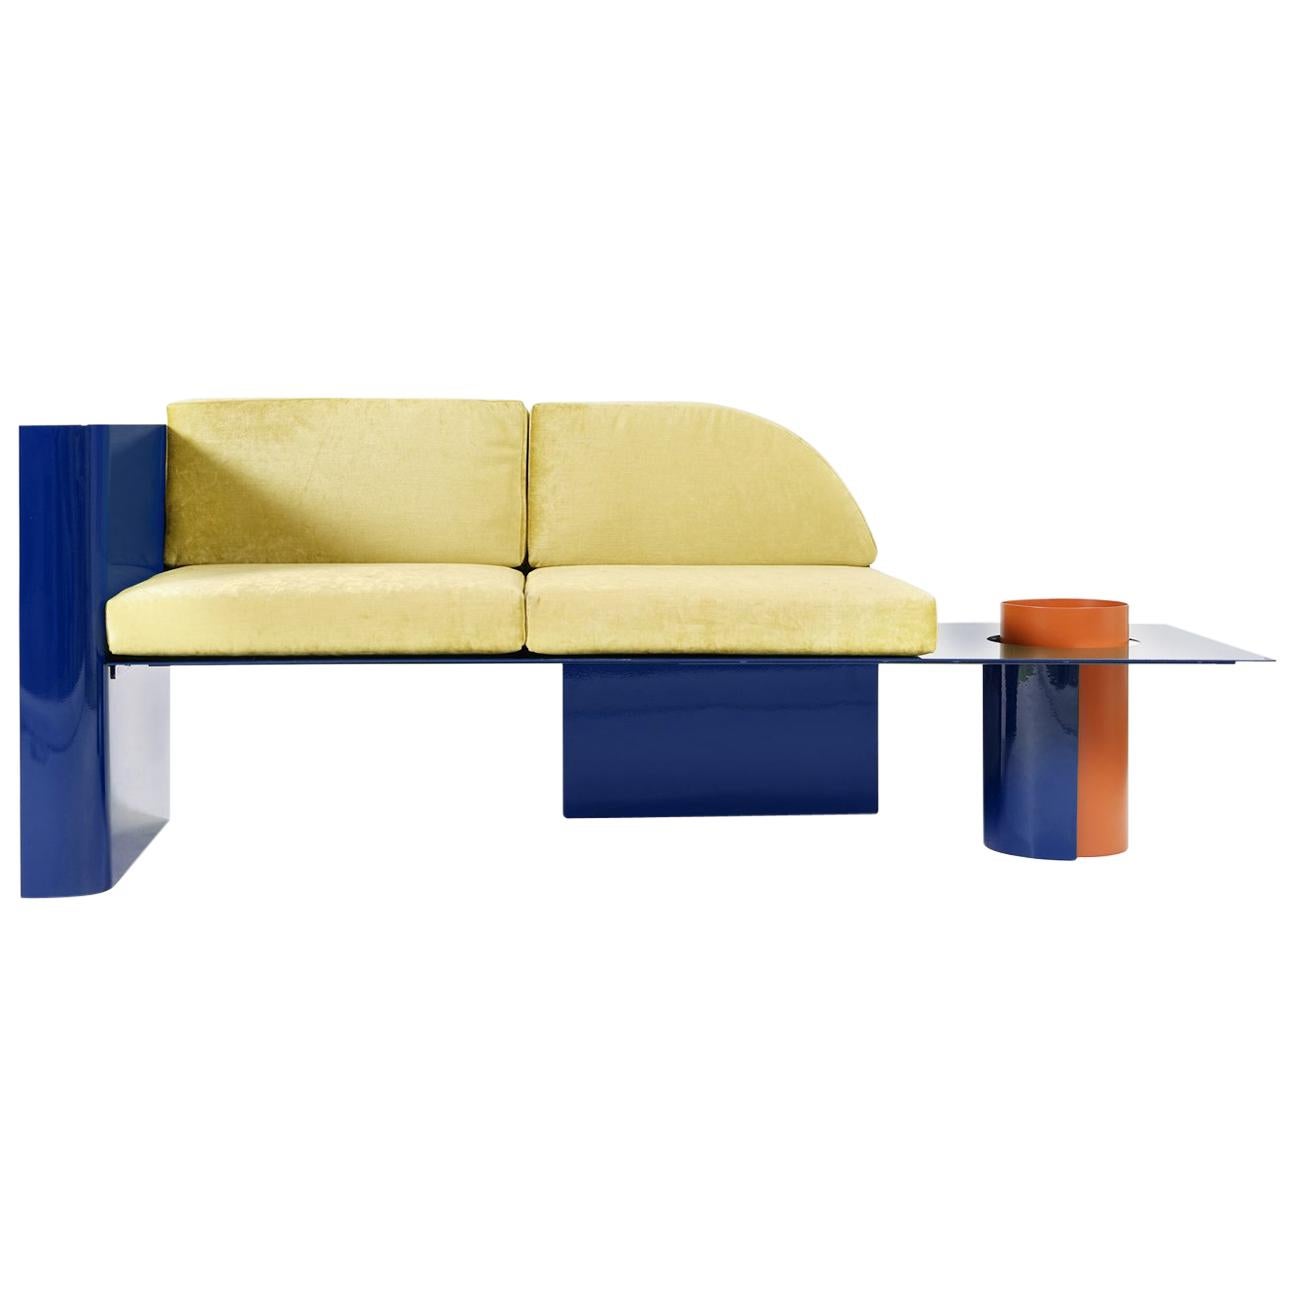  Blue Modern Sofa in Powder-Coated Steel with Planter Side Table im Angebot